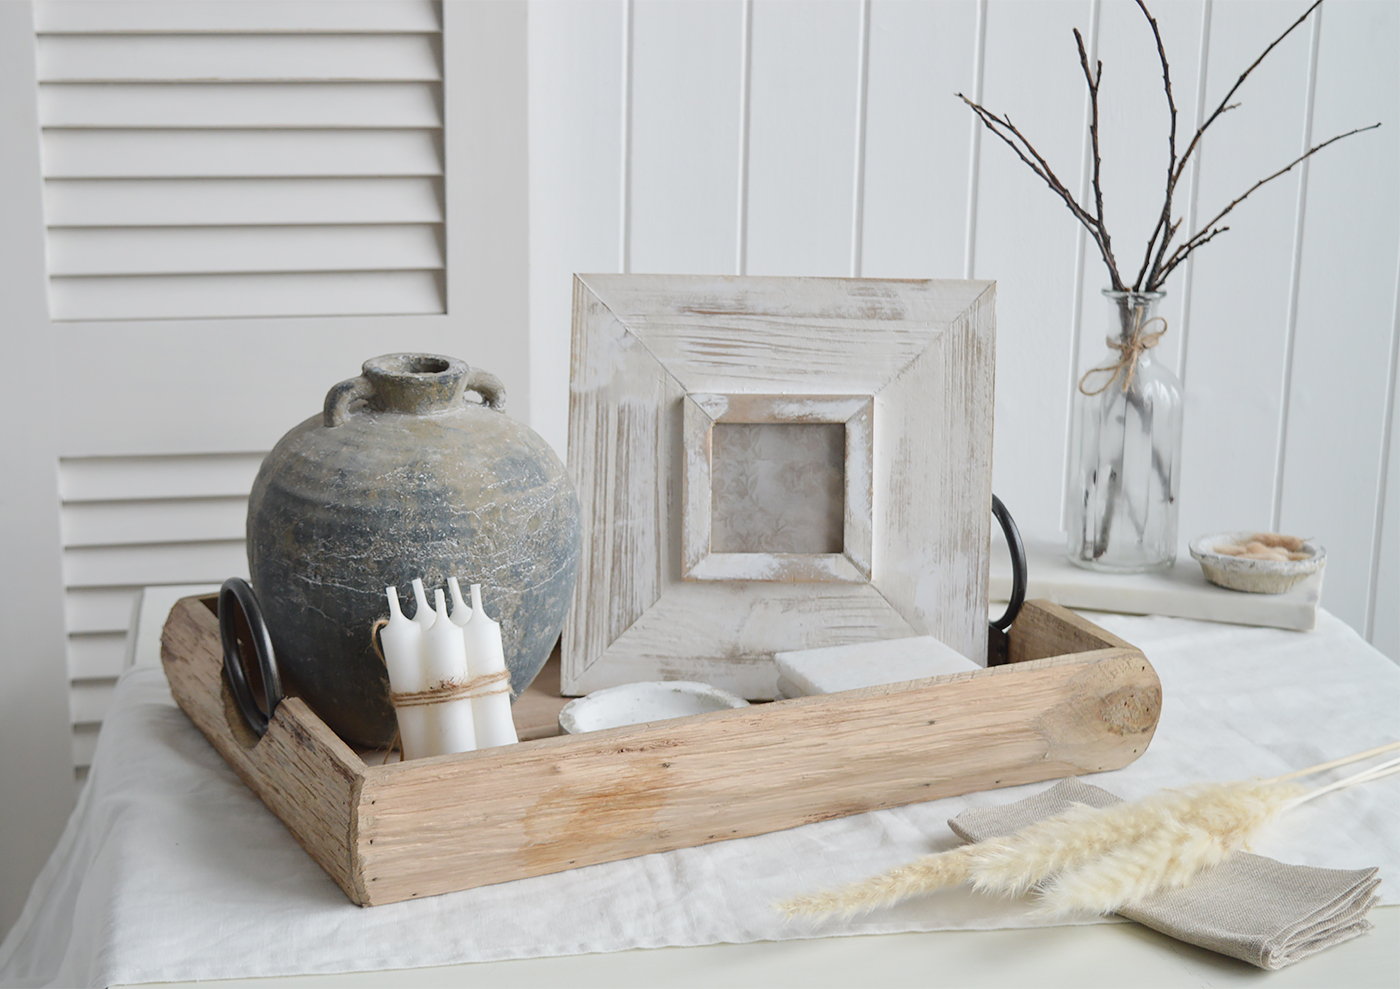 Hillsboro wooden tray with iron handles , ideal to add layers when styling your coffee table or console